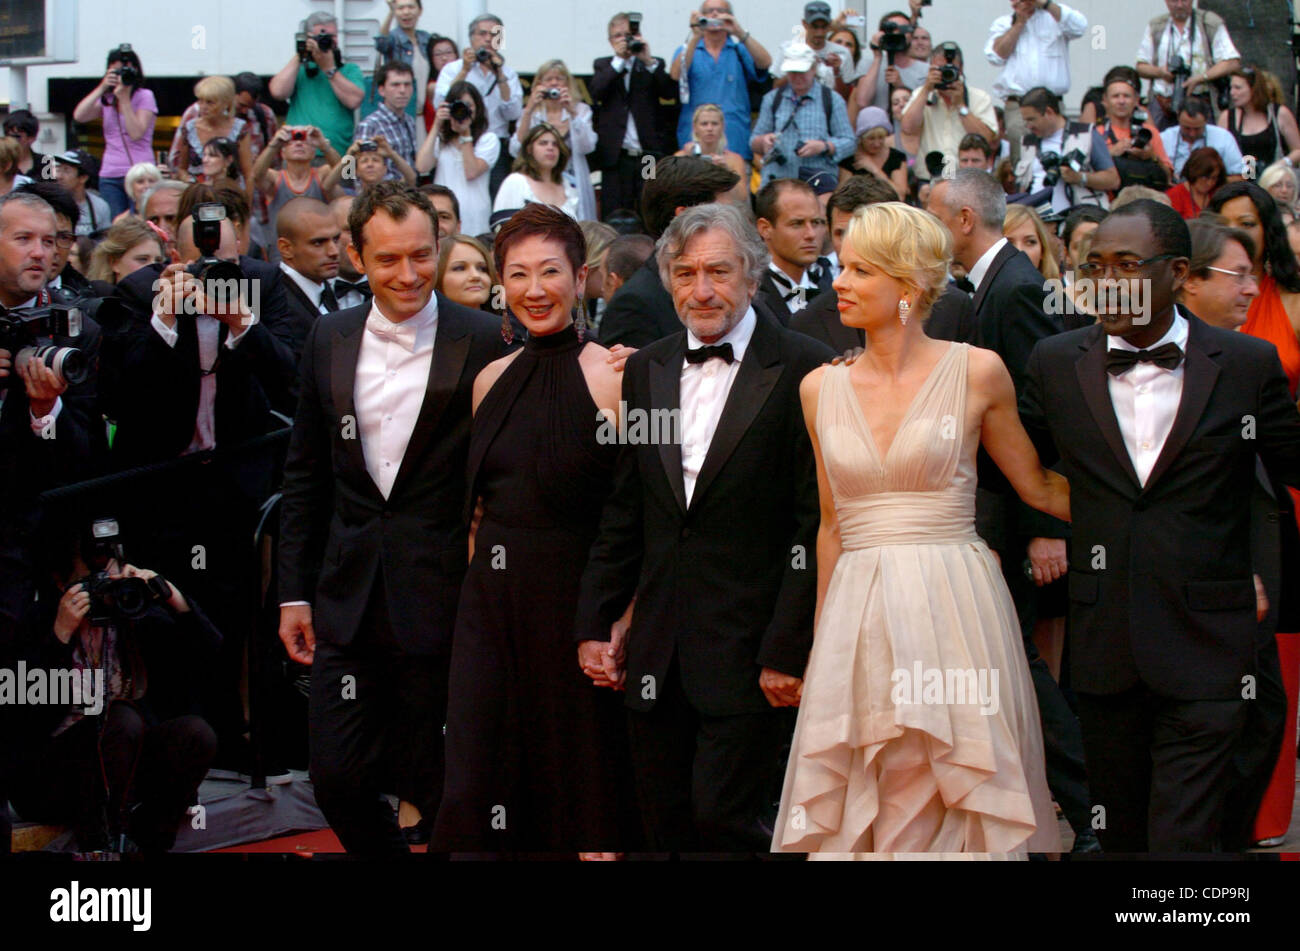 May 22, 2011 - Cannes, France - Jury Members JUDE LAW, NANSUN SHI, Jury President ROBERT DE NIRO, LINN ULLMANN, MARTINA GUSMAN and MAHAMAT-SALEH HAROUN attend the 'Les Bien-Aimes' (The Beloved) Premiere and Closing Ceremony during the 64th International Cannes Film Festival. (Credit Image: © Frederi Stock Photo